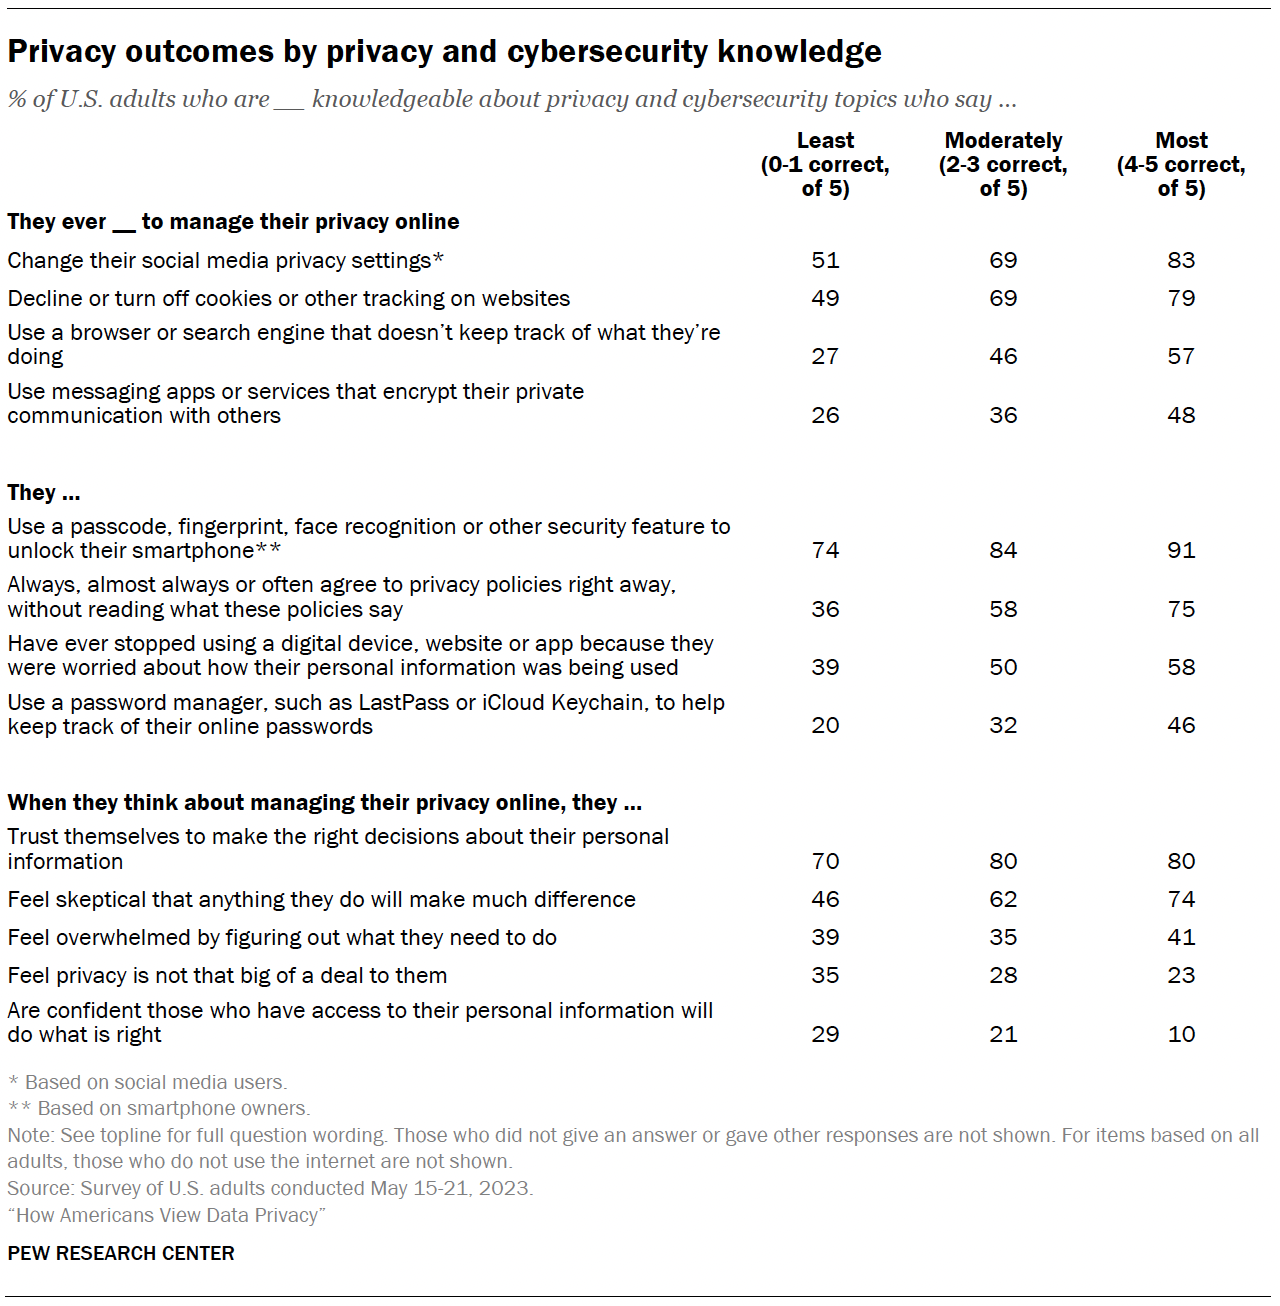 A table showing Privacy outcomes by privacy and cybersecurity knowledge